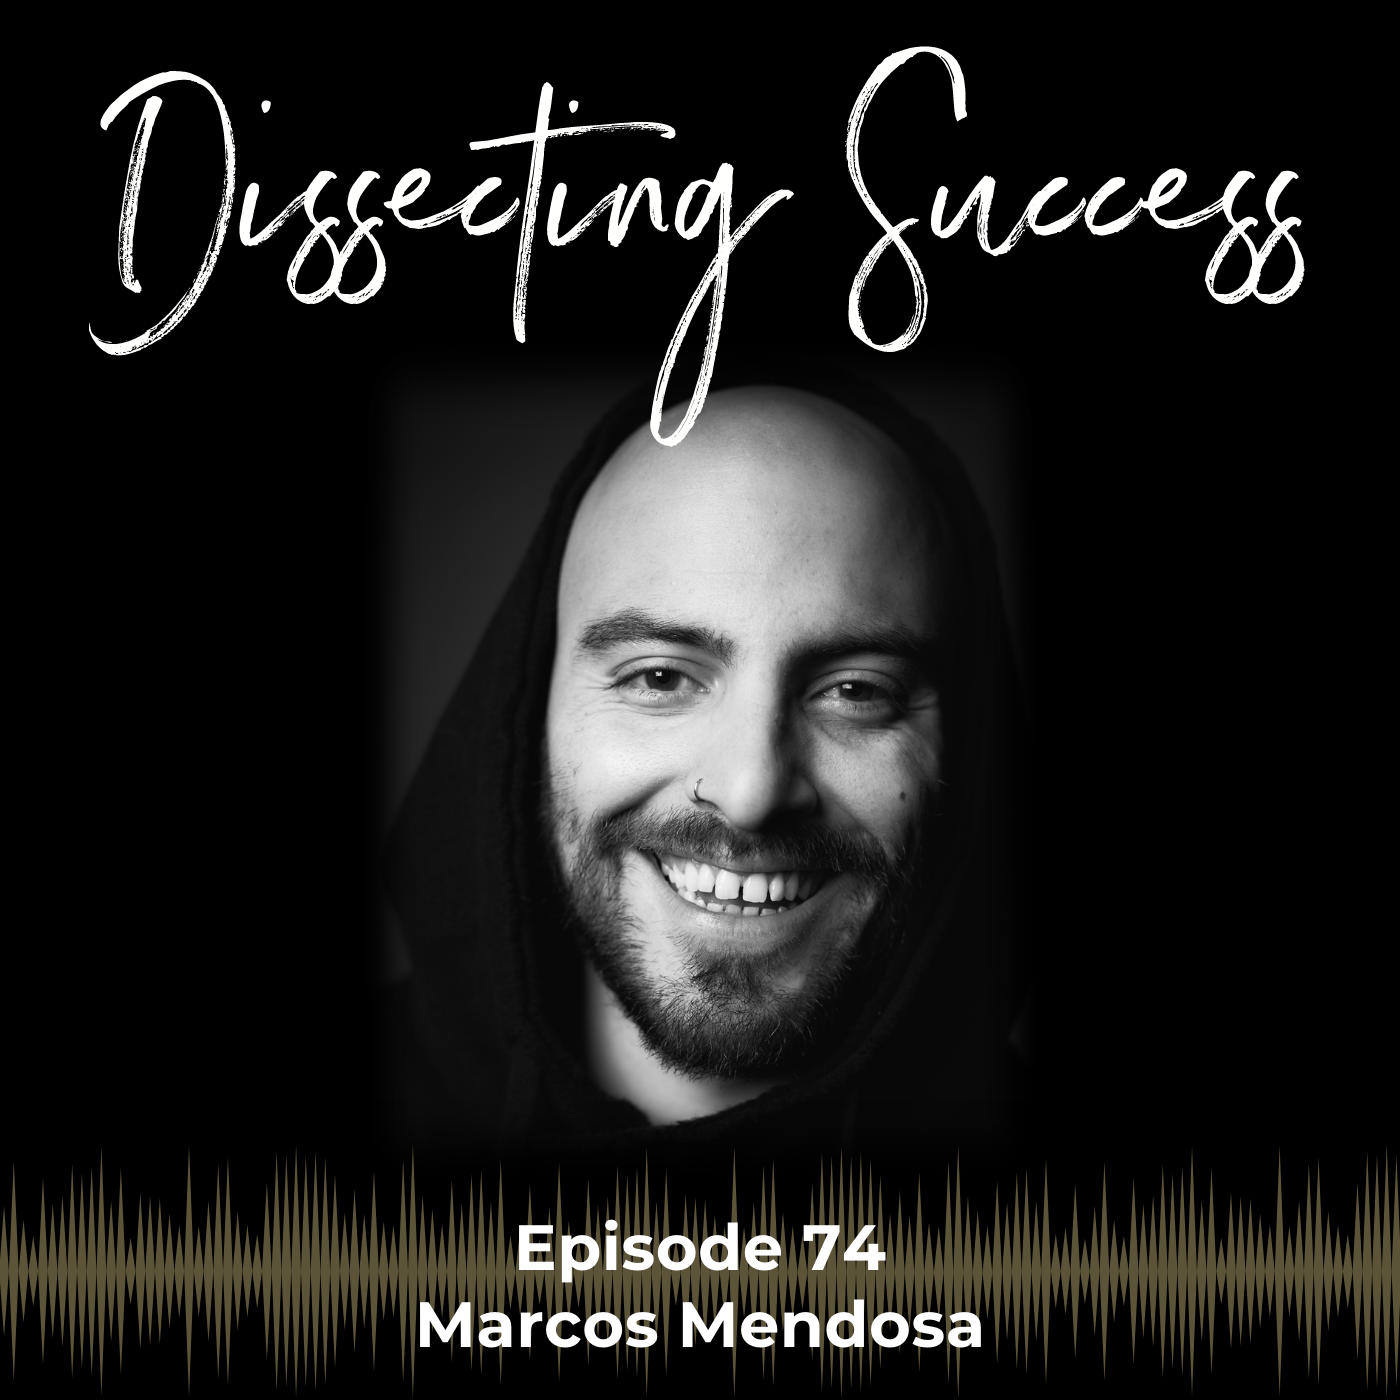 Ep 074: Success is Progress with Marcos Mendosa